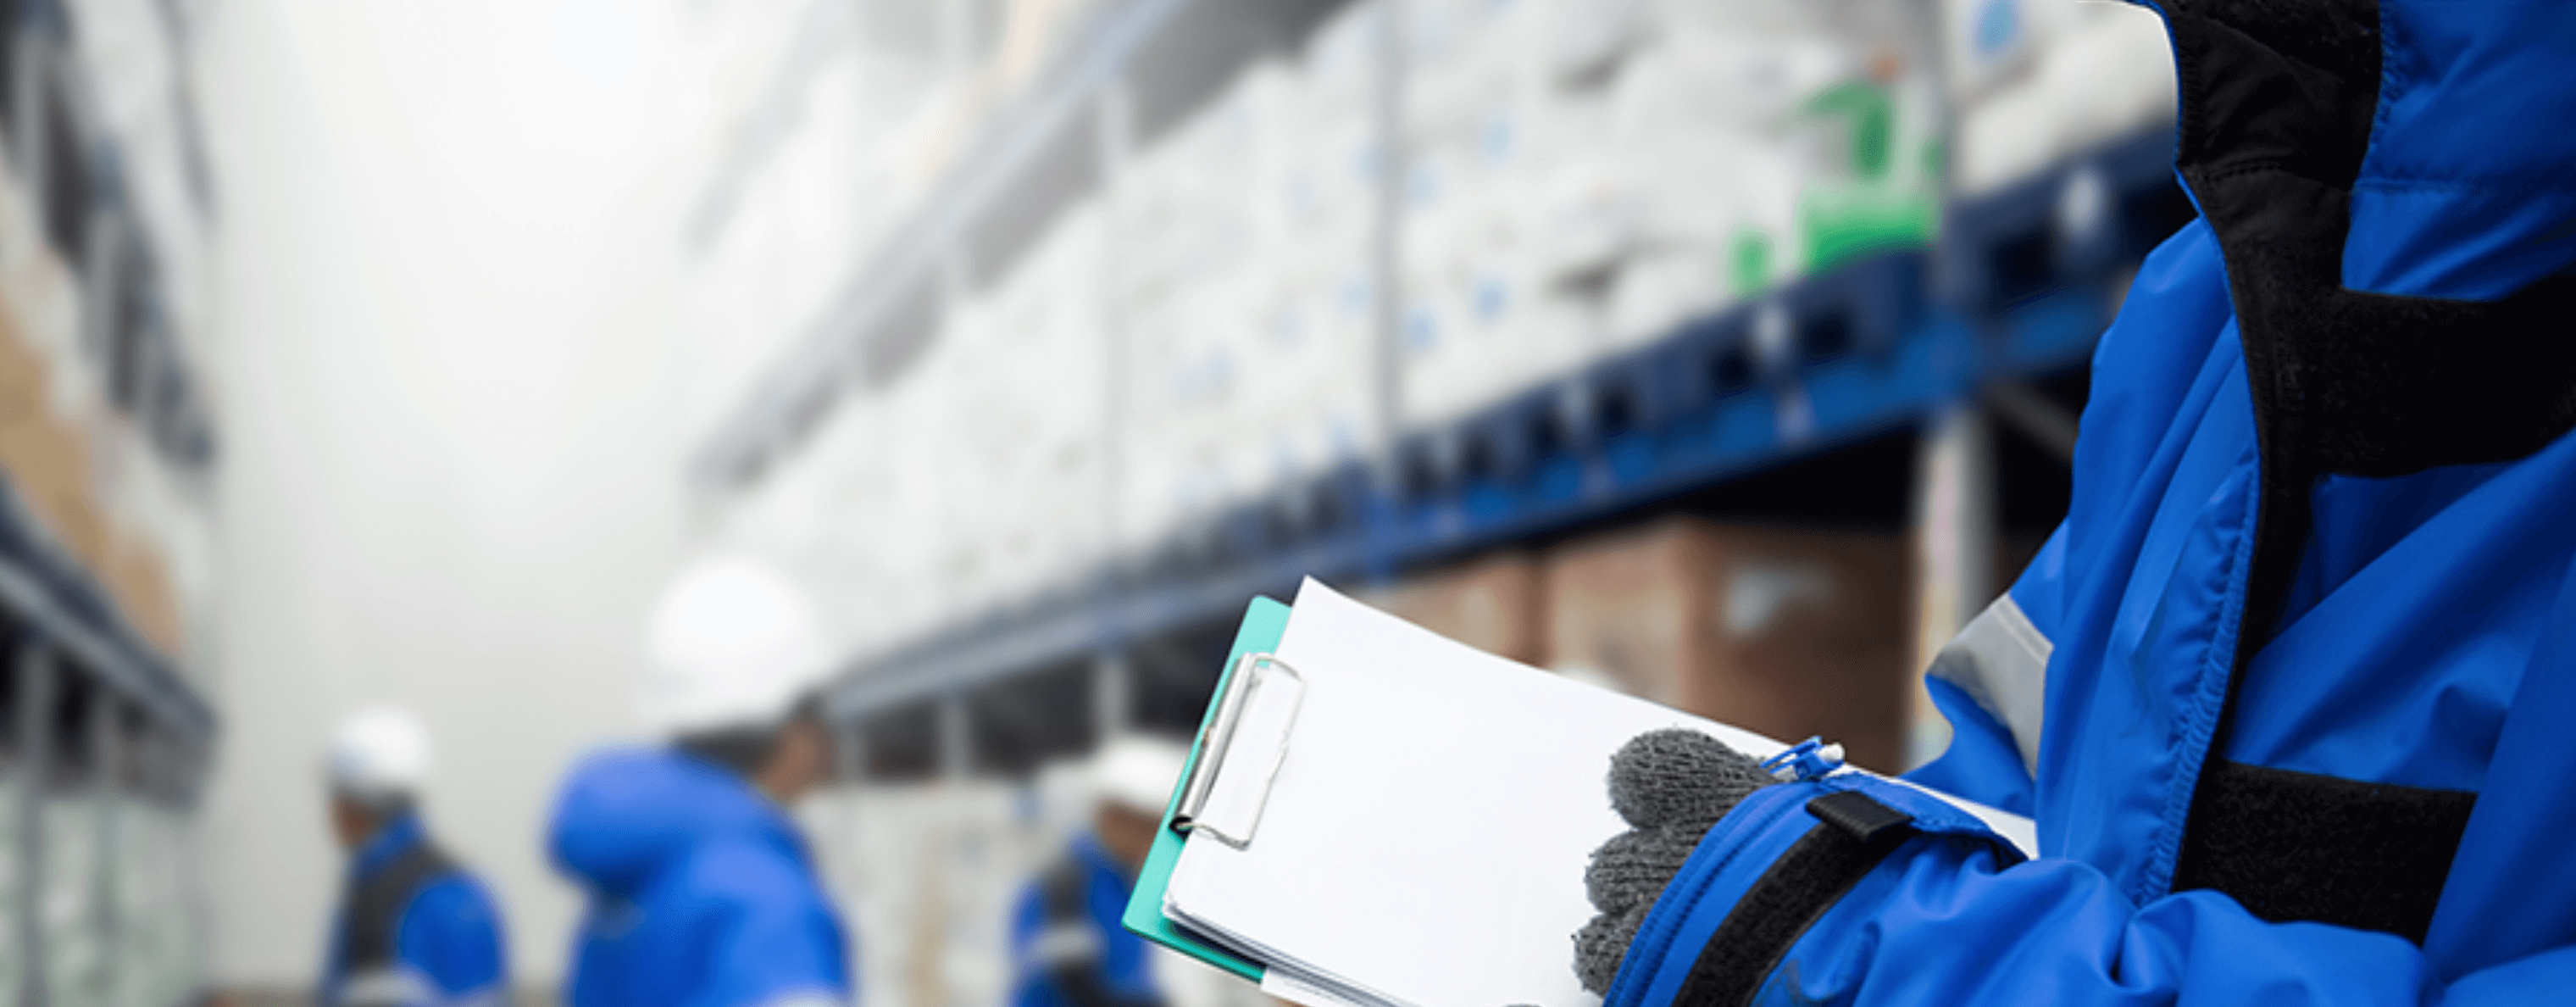 Key Elements of The Cold Chain Solution- Monitoring